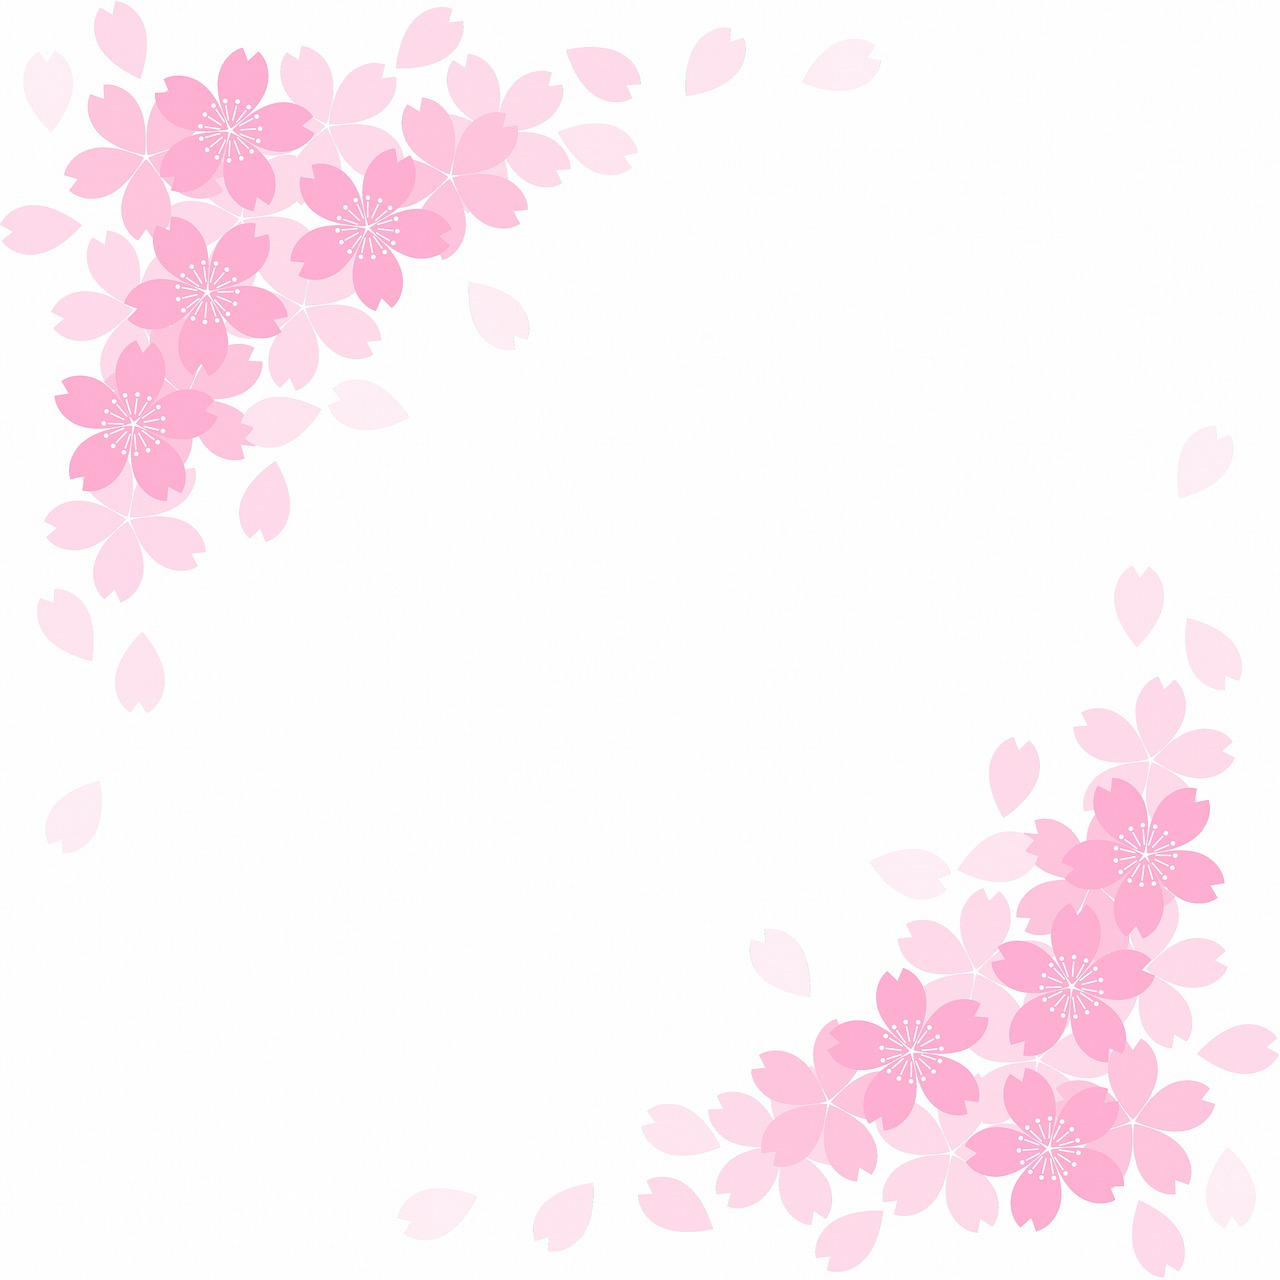 a picture of some pink flowers on a white background, a picture, sōsaku hanga, background(solid), cherry blossom falling, corners, background image